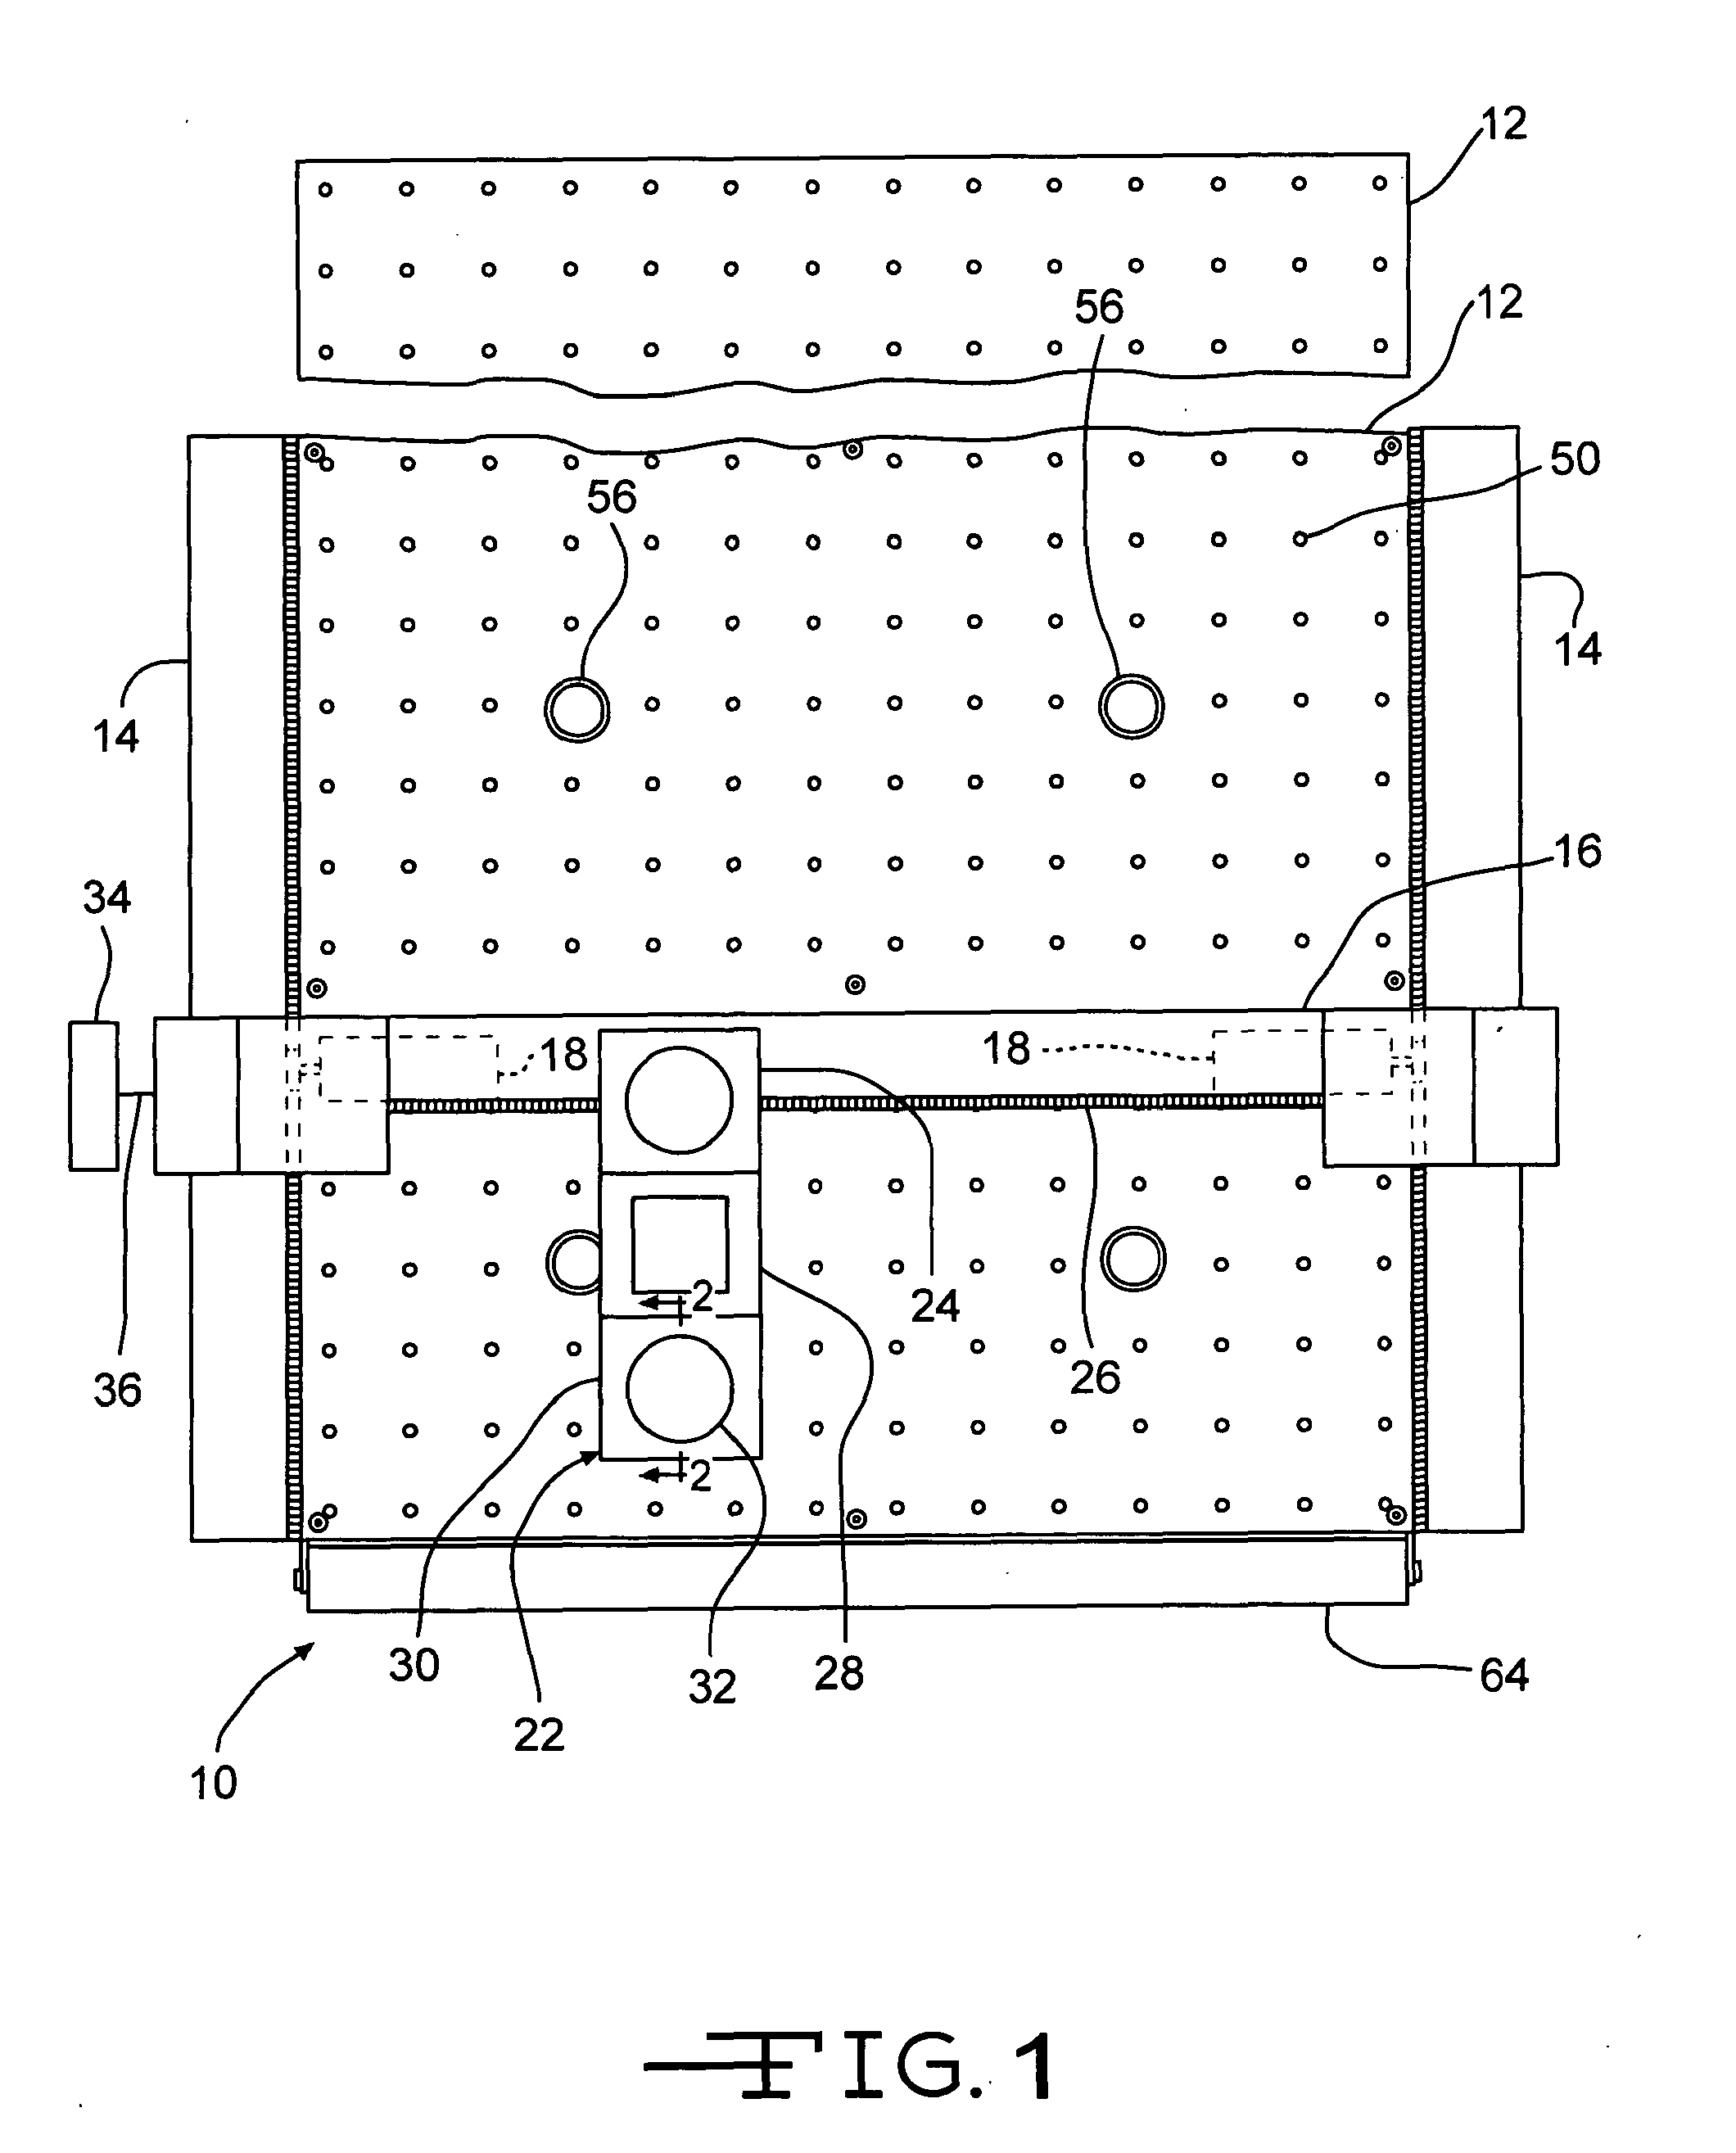 Apparatus and method for converting insulated panels